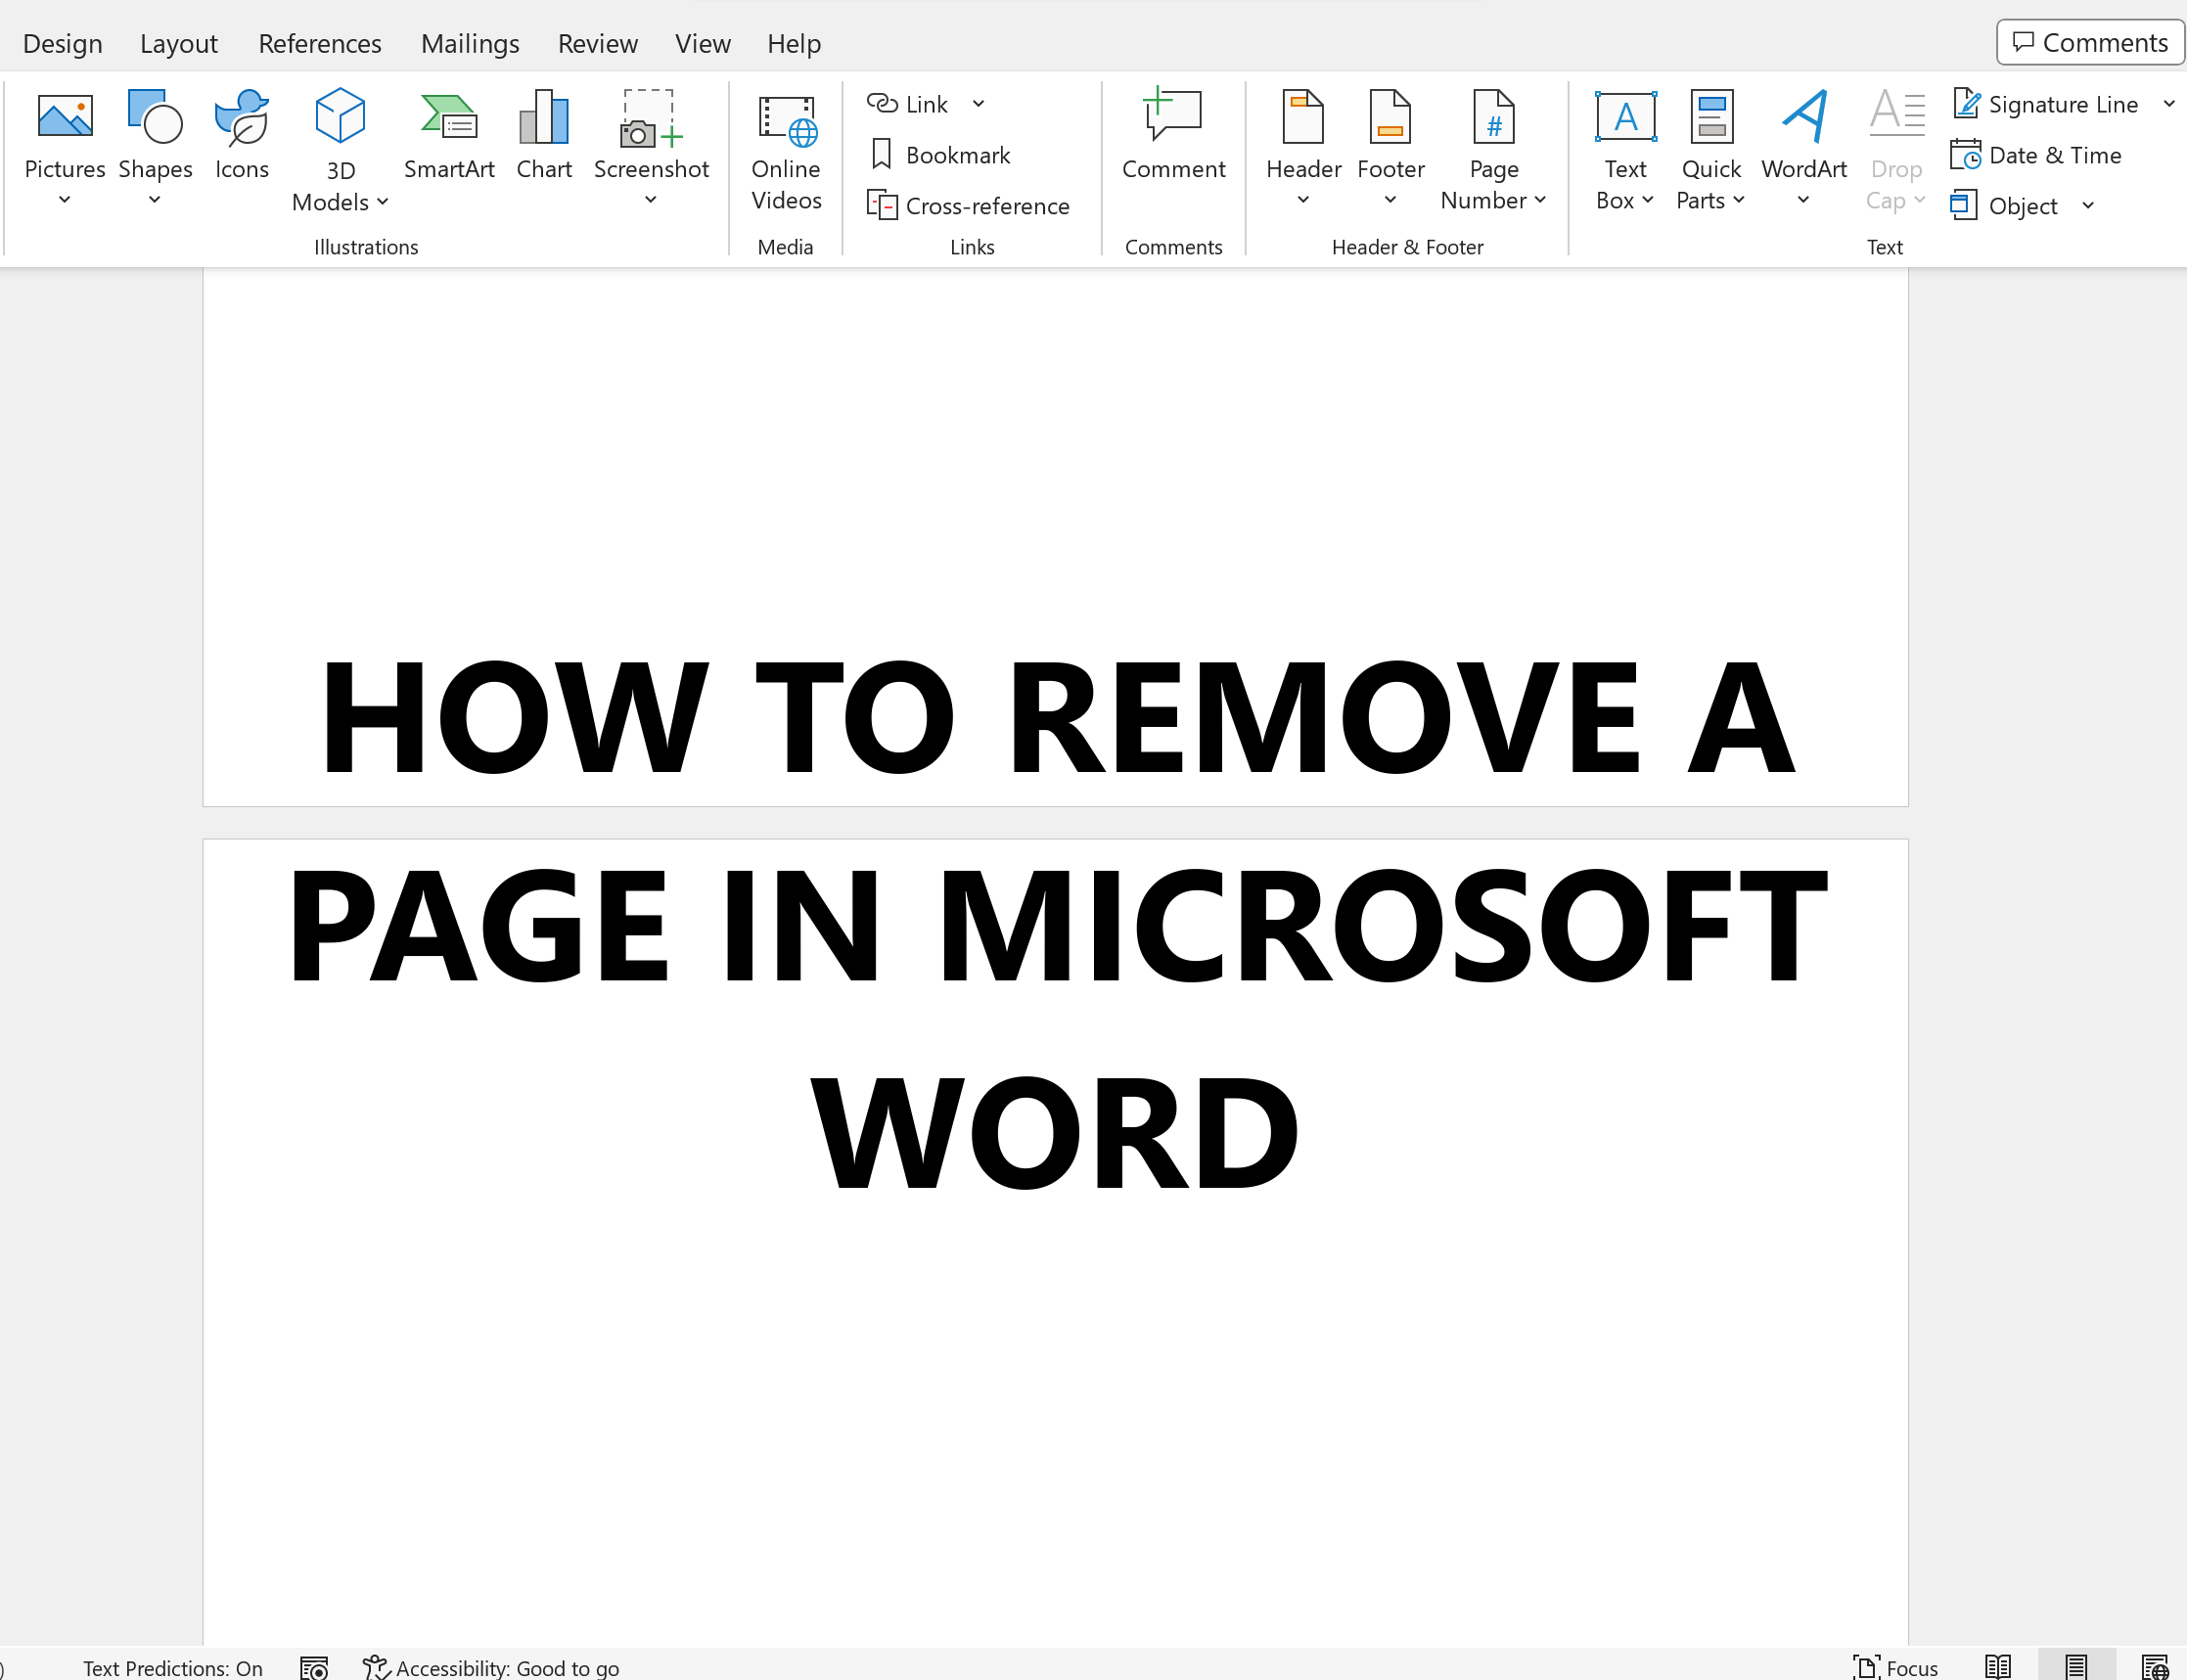 Remove a Page in Microsoft Word